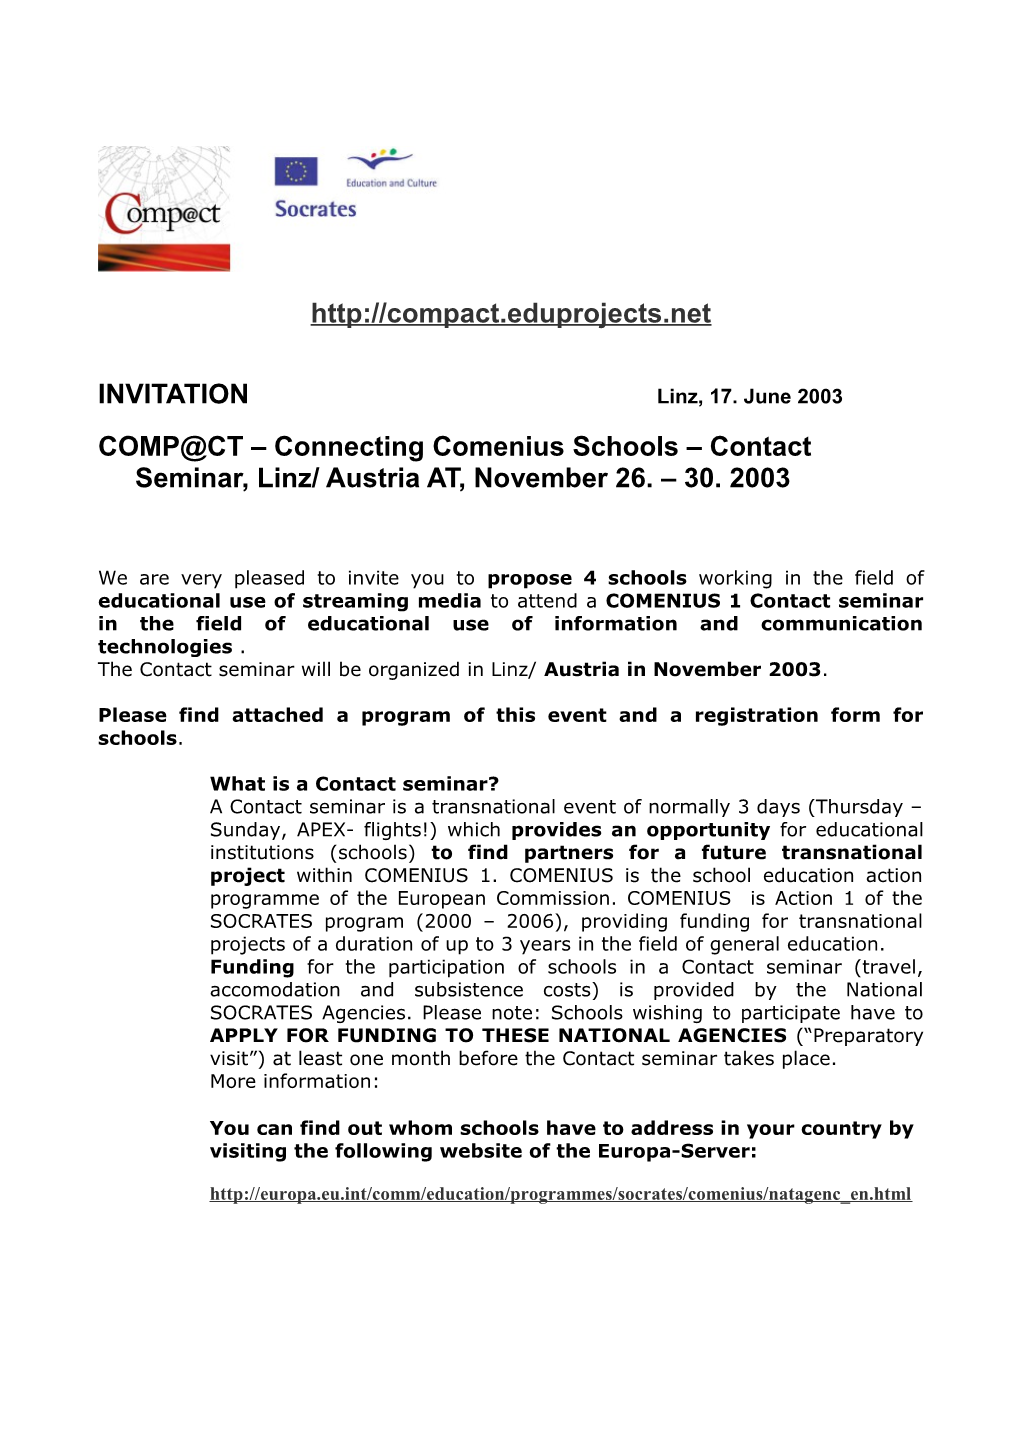 Preliminary Programme of Contact Seminar and Thematic Conference